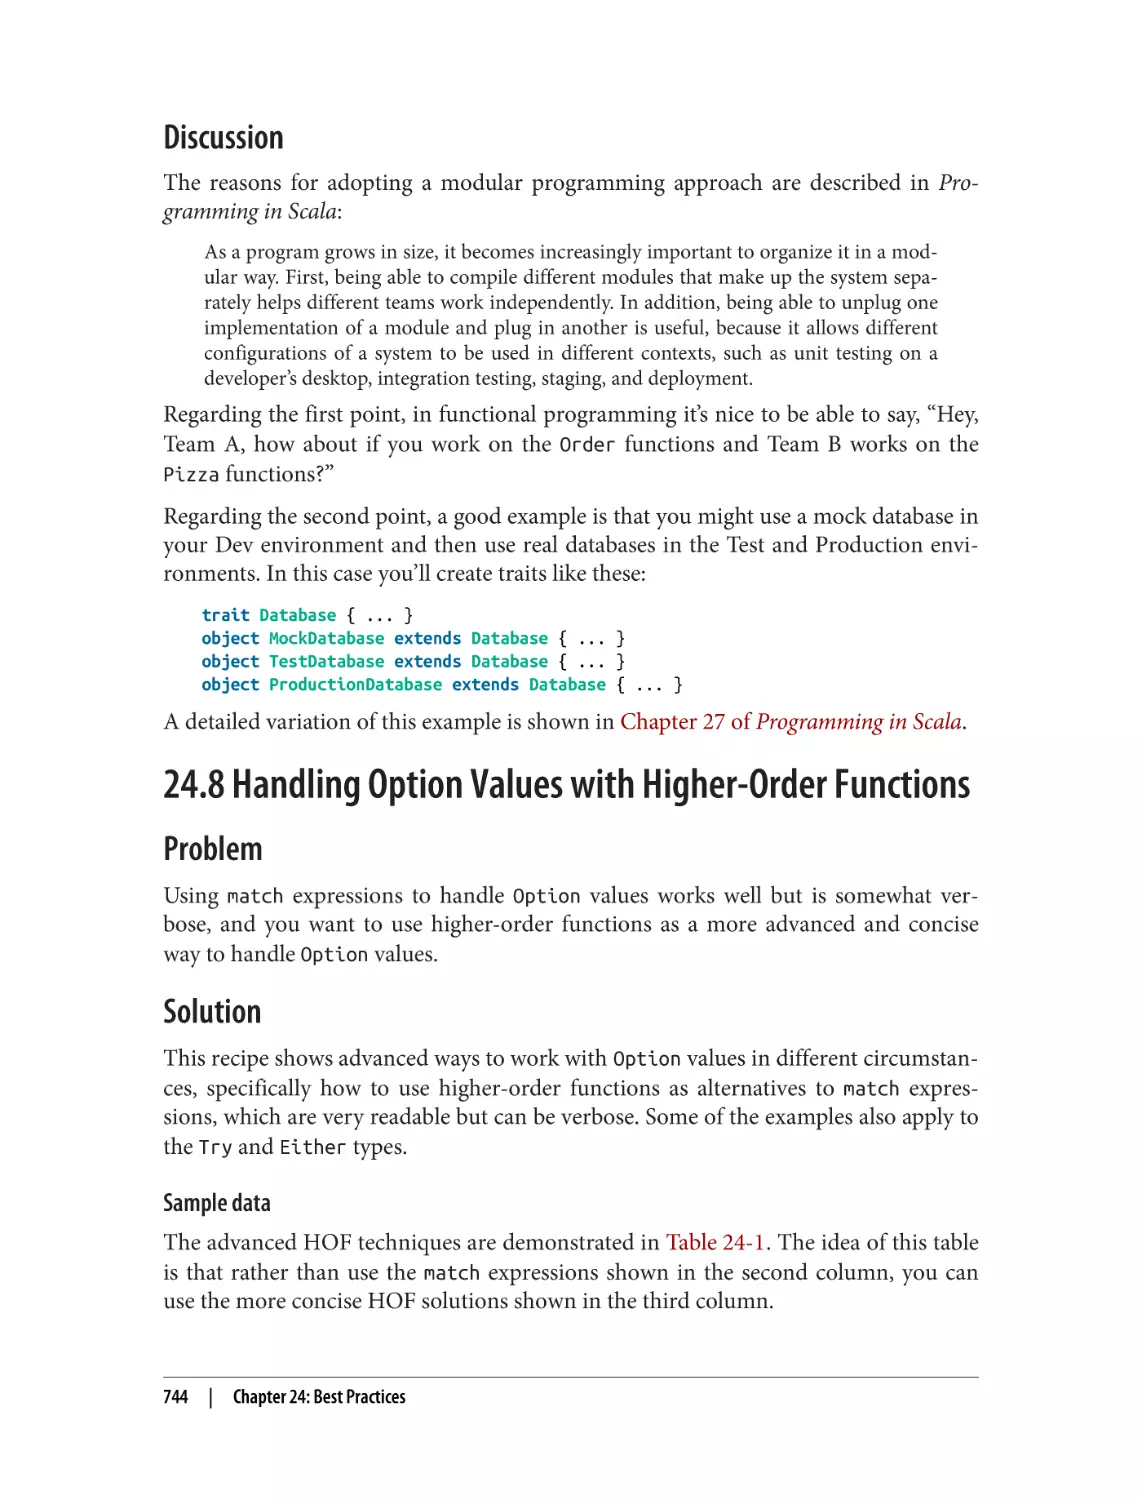 Discussion
24.8 Handling Option Values with Higher-Order Functions
Problem
Solution